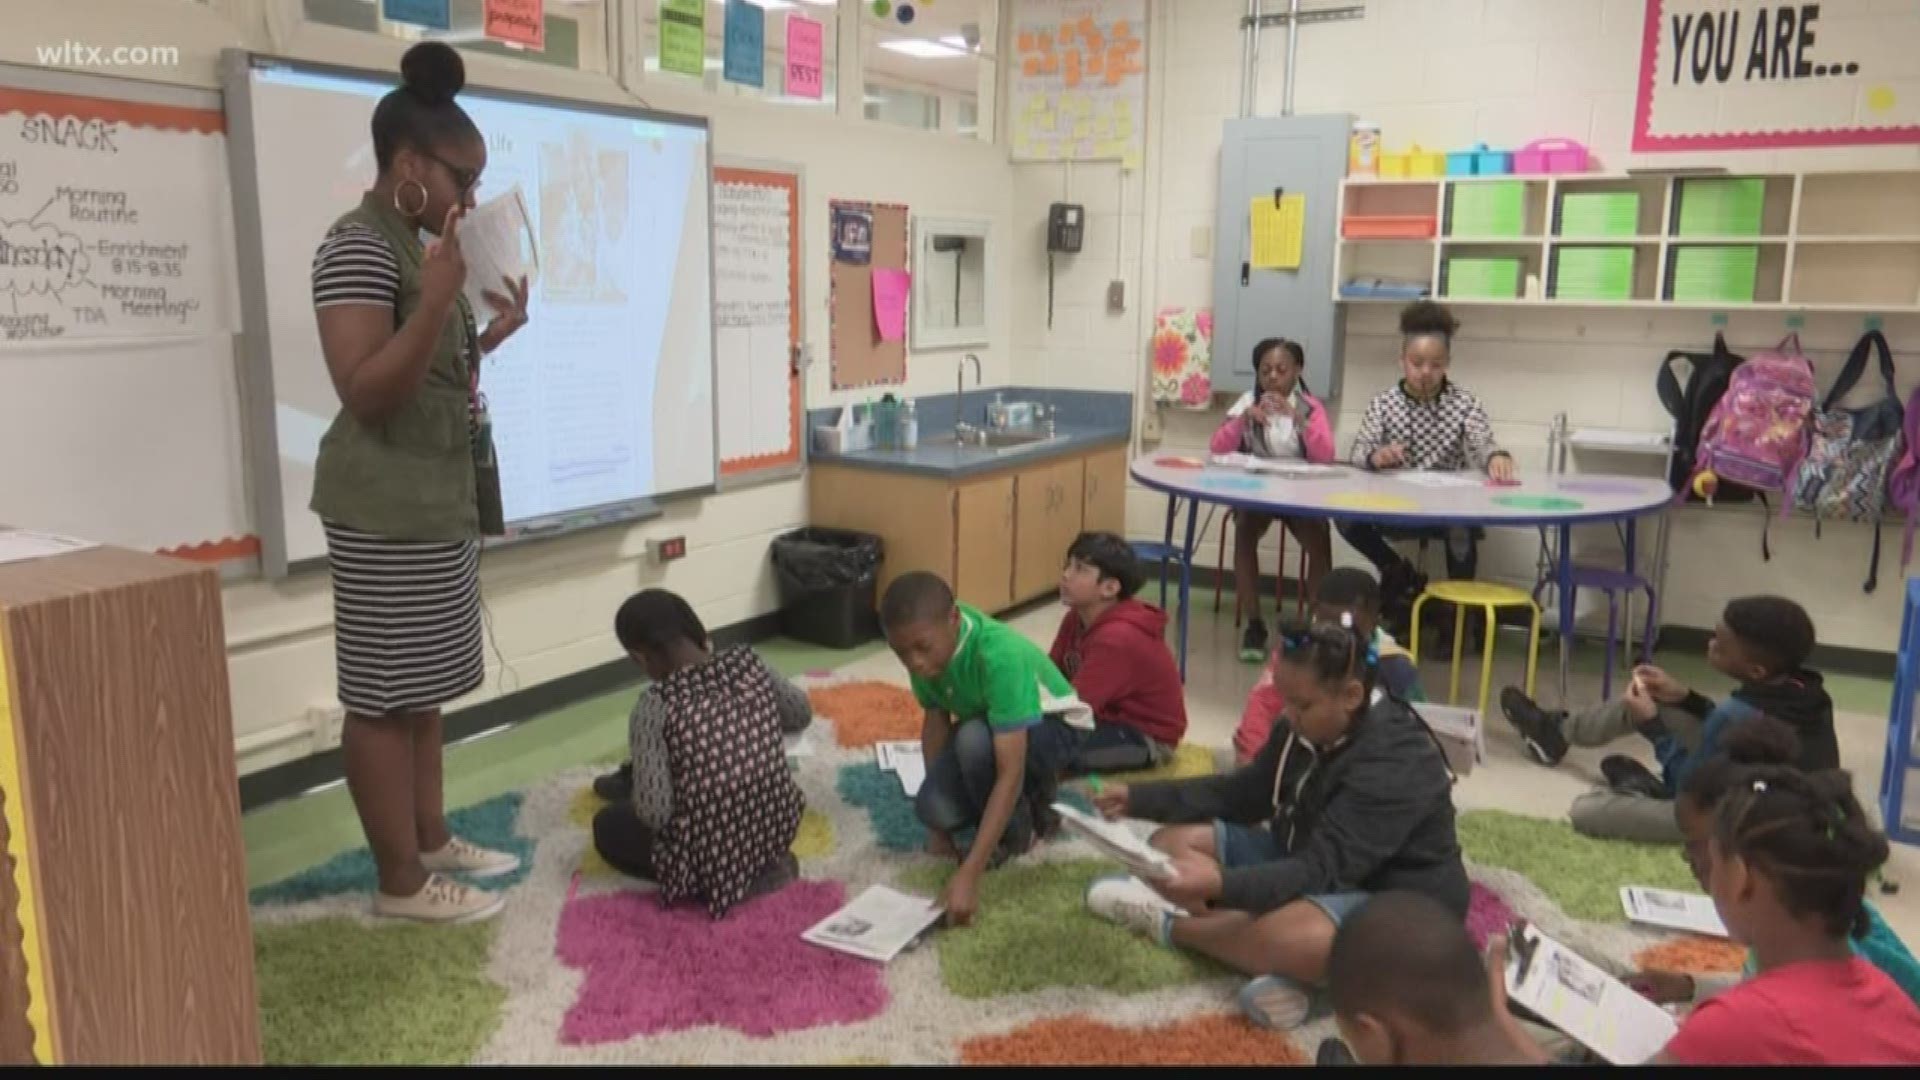 Keisha Randle is the type of educator that can captivate hearts and minds quickly.